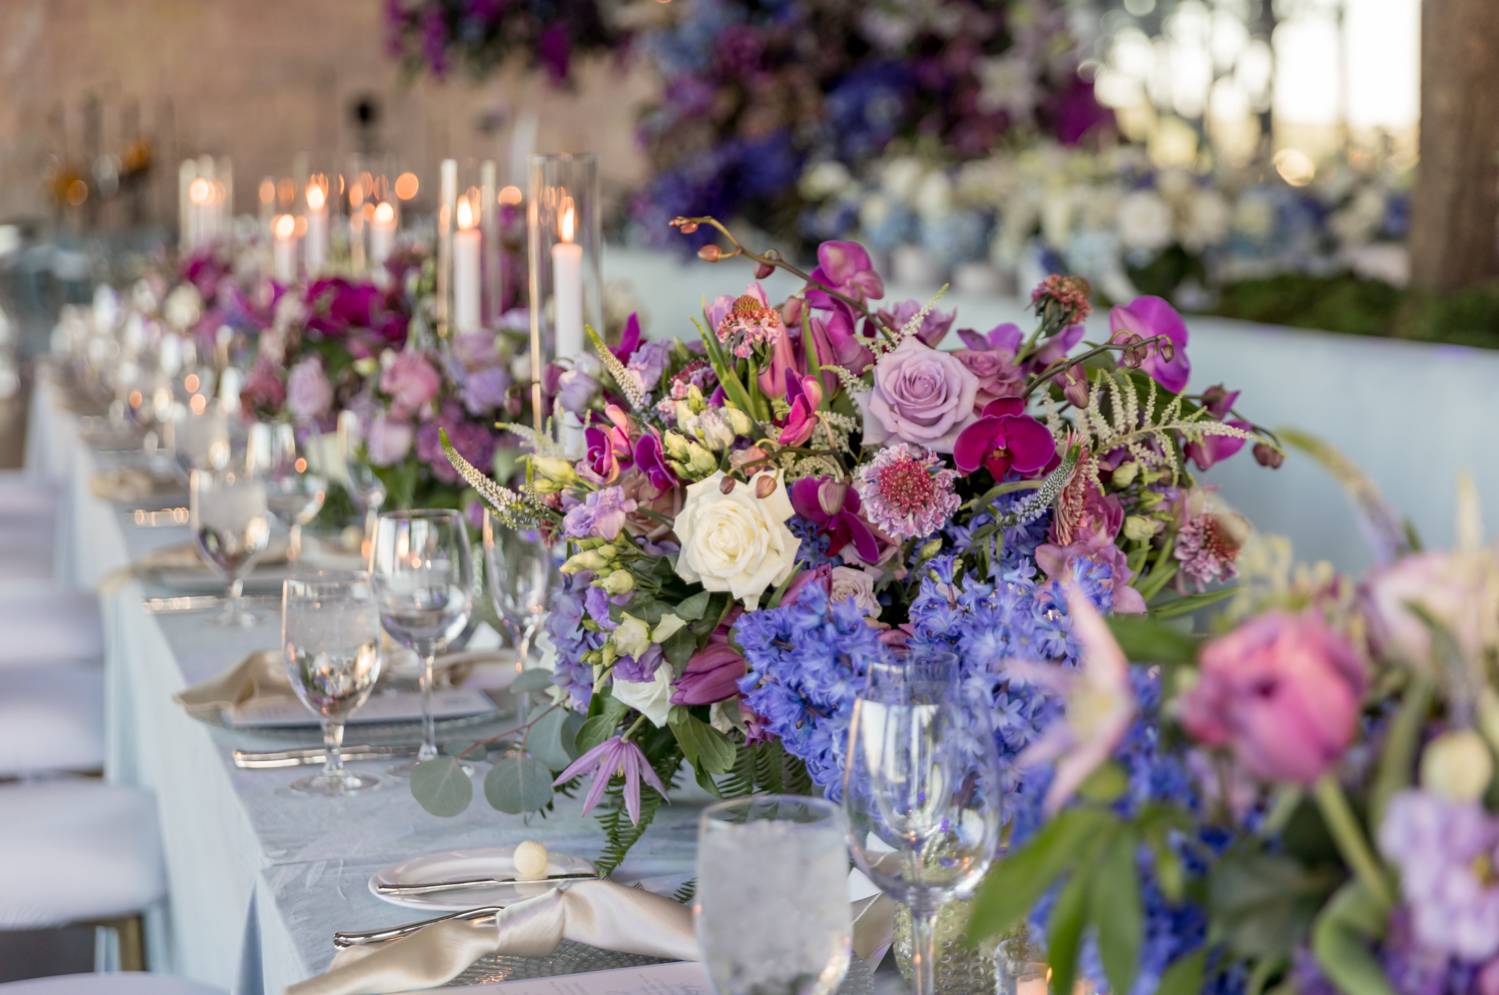 Beautiful blue, purple, and pink flower arrangements and glassware on the dinner tables at the reception.